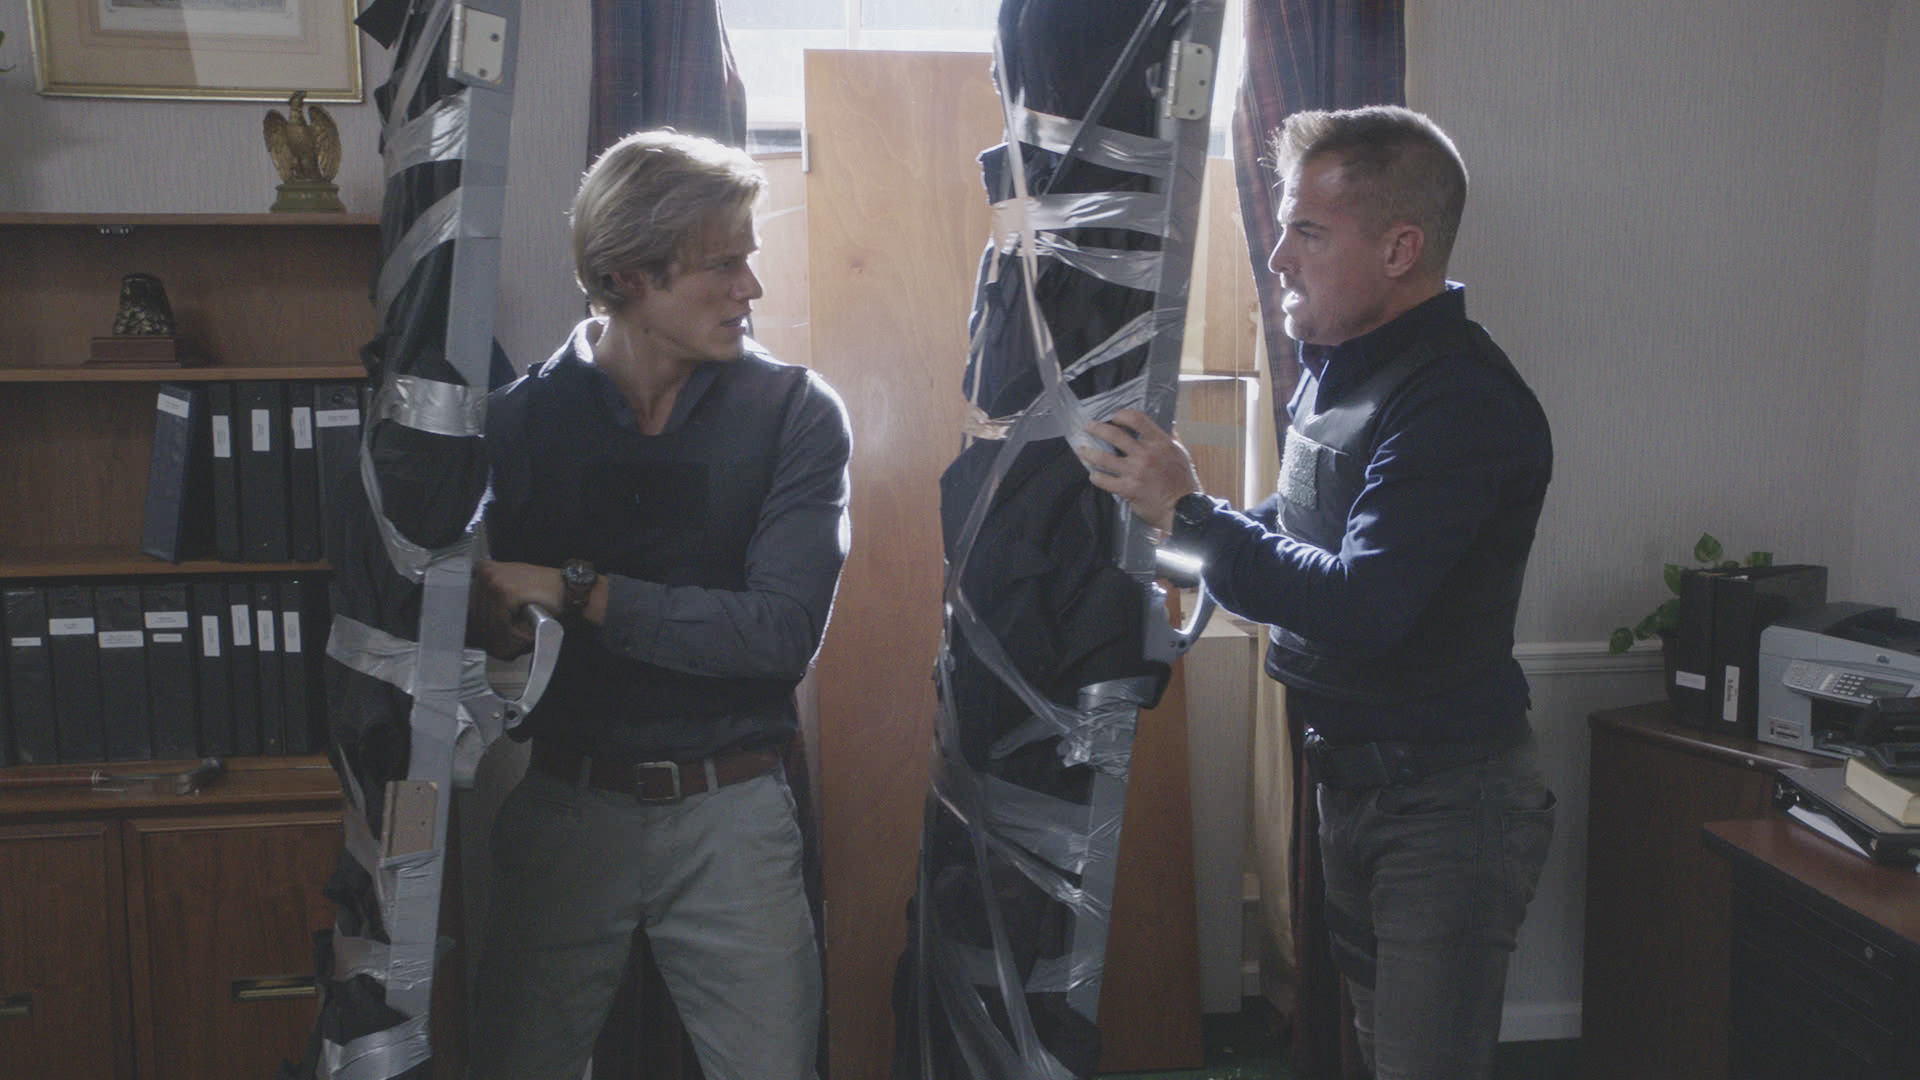 MacGyver and Jack work their way around some duct tape.